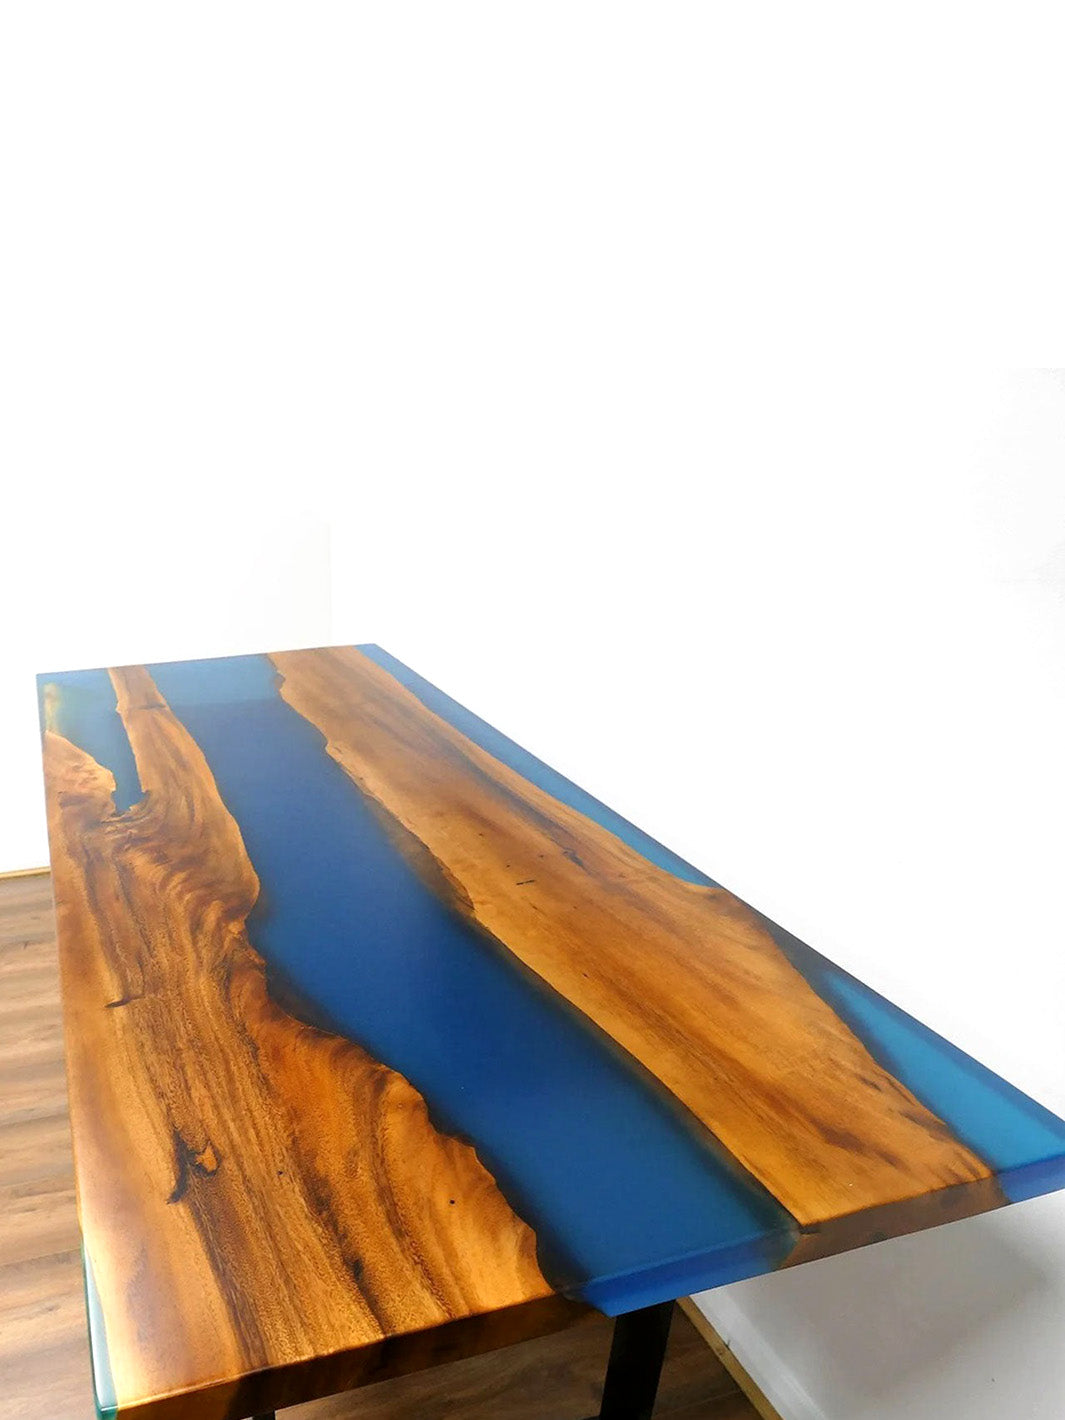 Handcrafted River Beach Epoxy Resin Wooden Dining Table | 170x70cm Made 4 Decor Tables MDR0006-5